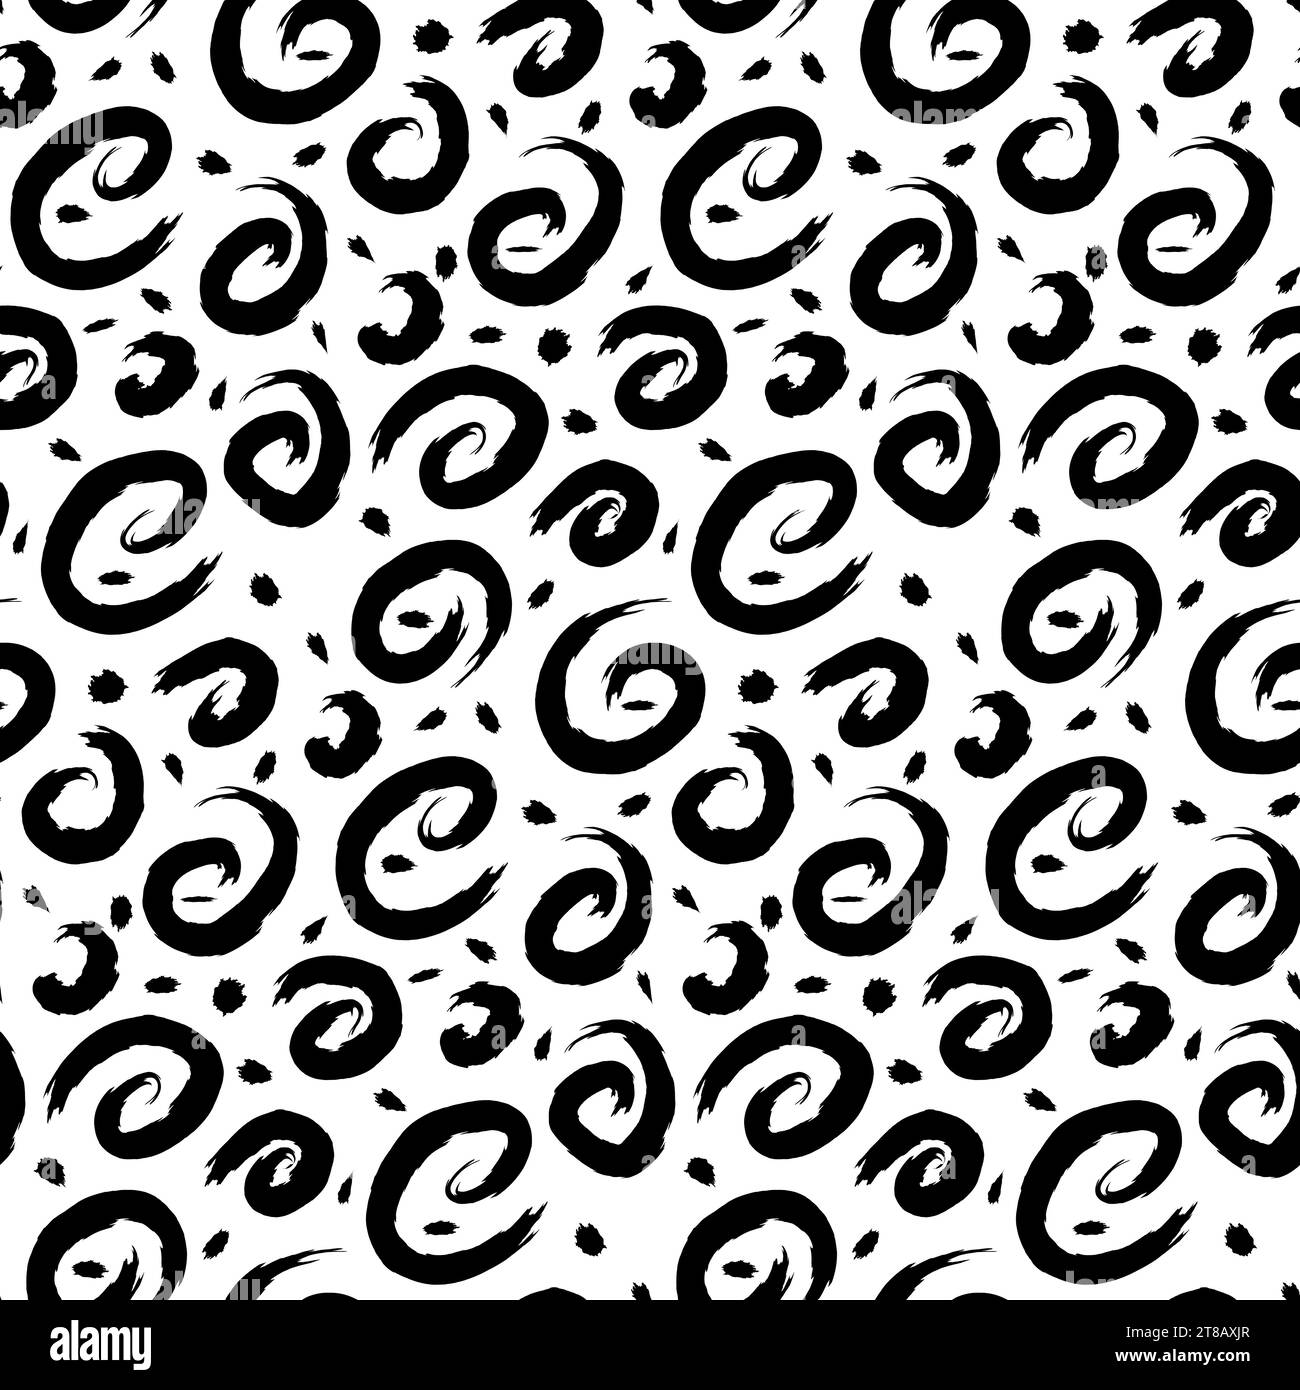 Drip pattern Black and White Stock Photos & Images - Page 3 - Alamy